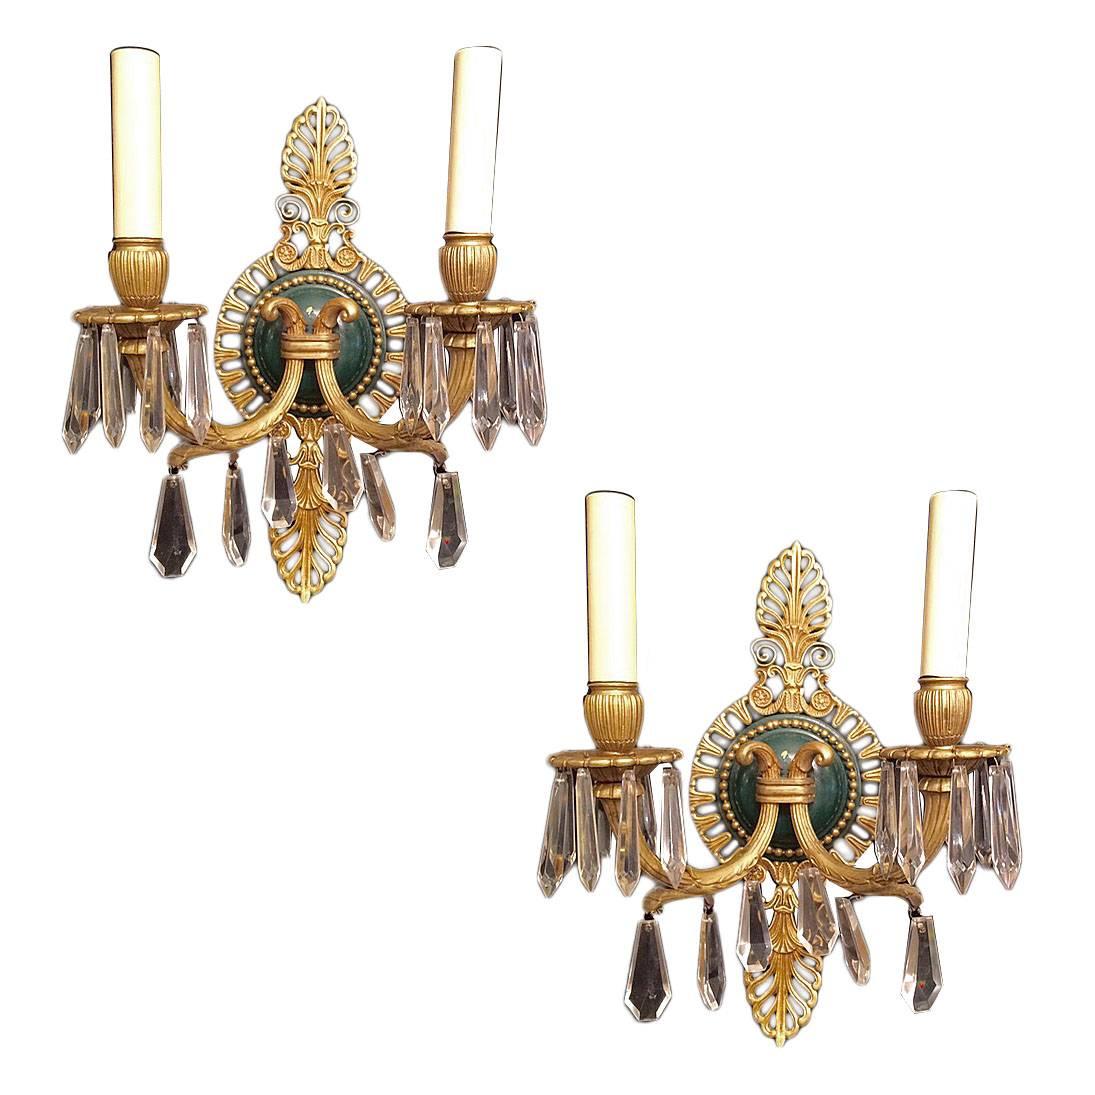 Pair of French Empire Sconces with Crystals